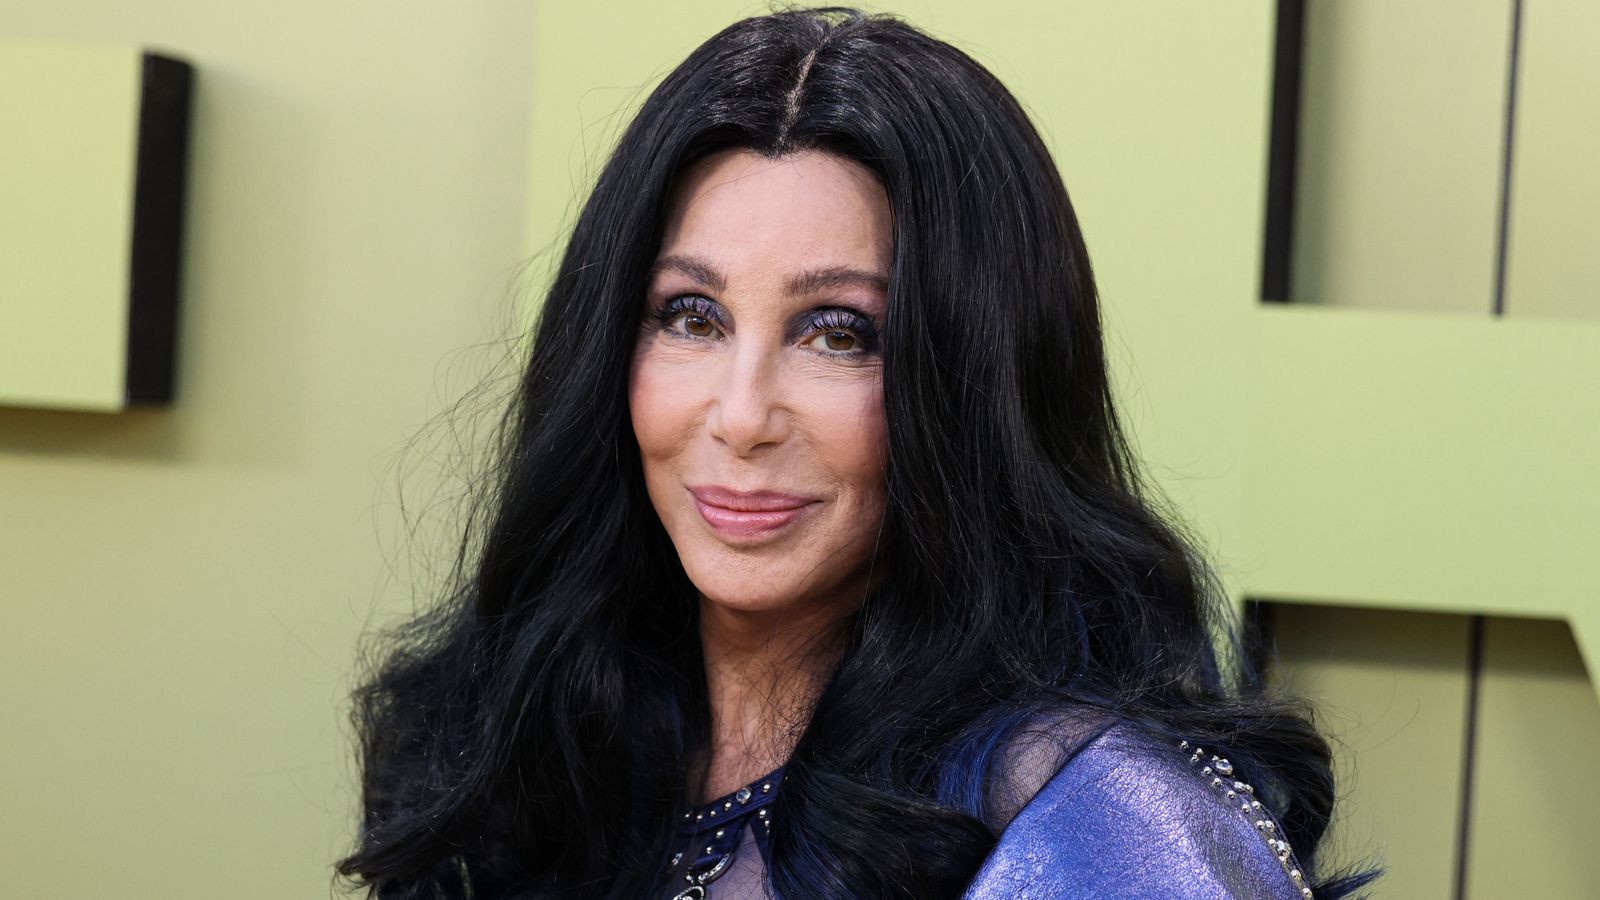 Singer Cher denies allegations she hired four men to kidnap her 47-year-old son